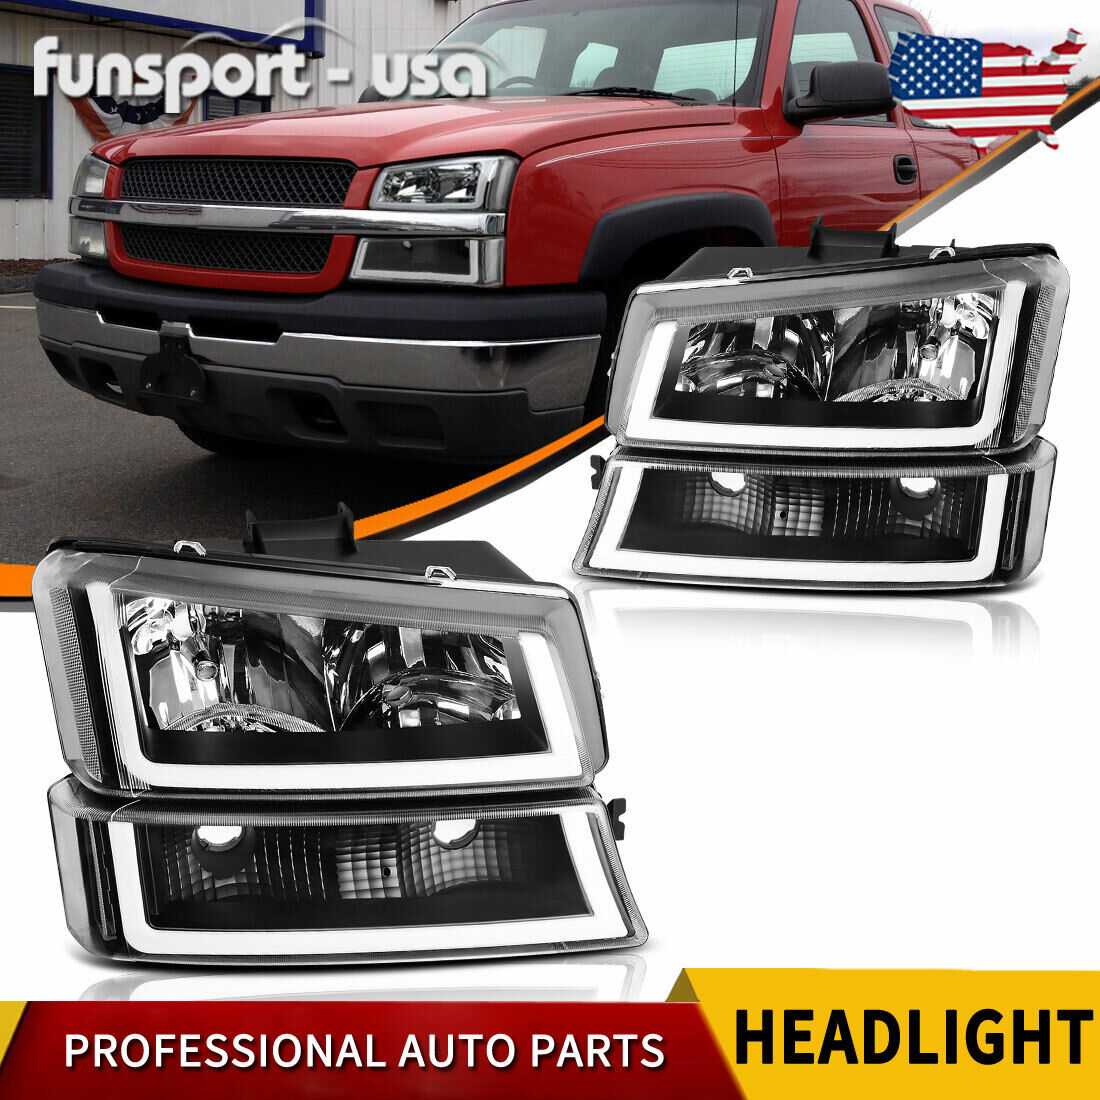 LED DRL TUBE HEADLIGHTS FOR 03-07 CHEVY SILVERADO BLACK HOUSING CLEAR HEADLAMPS